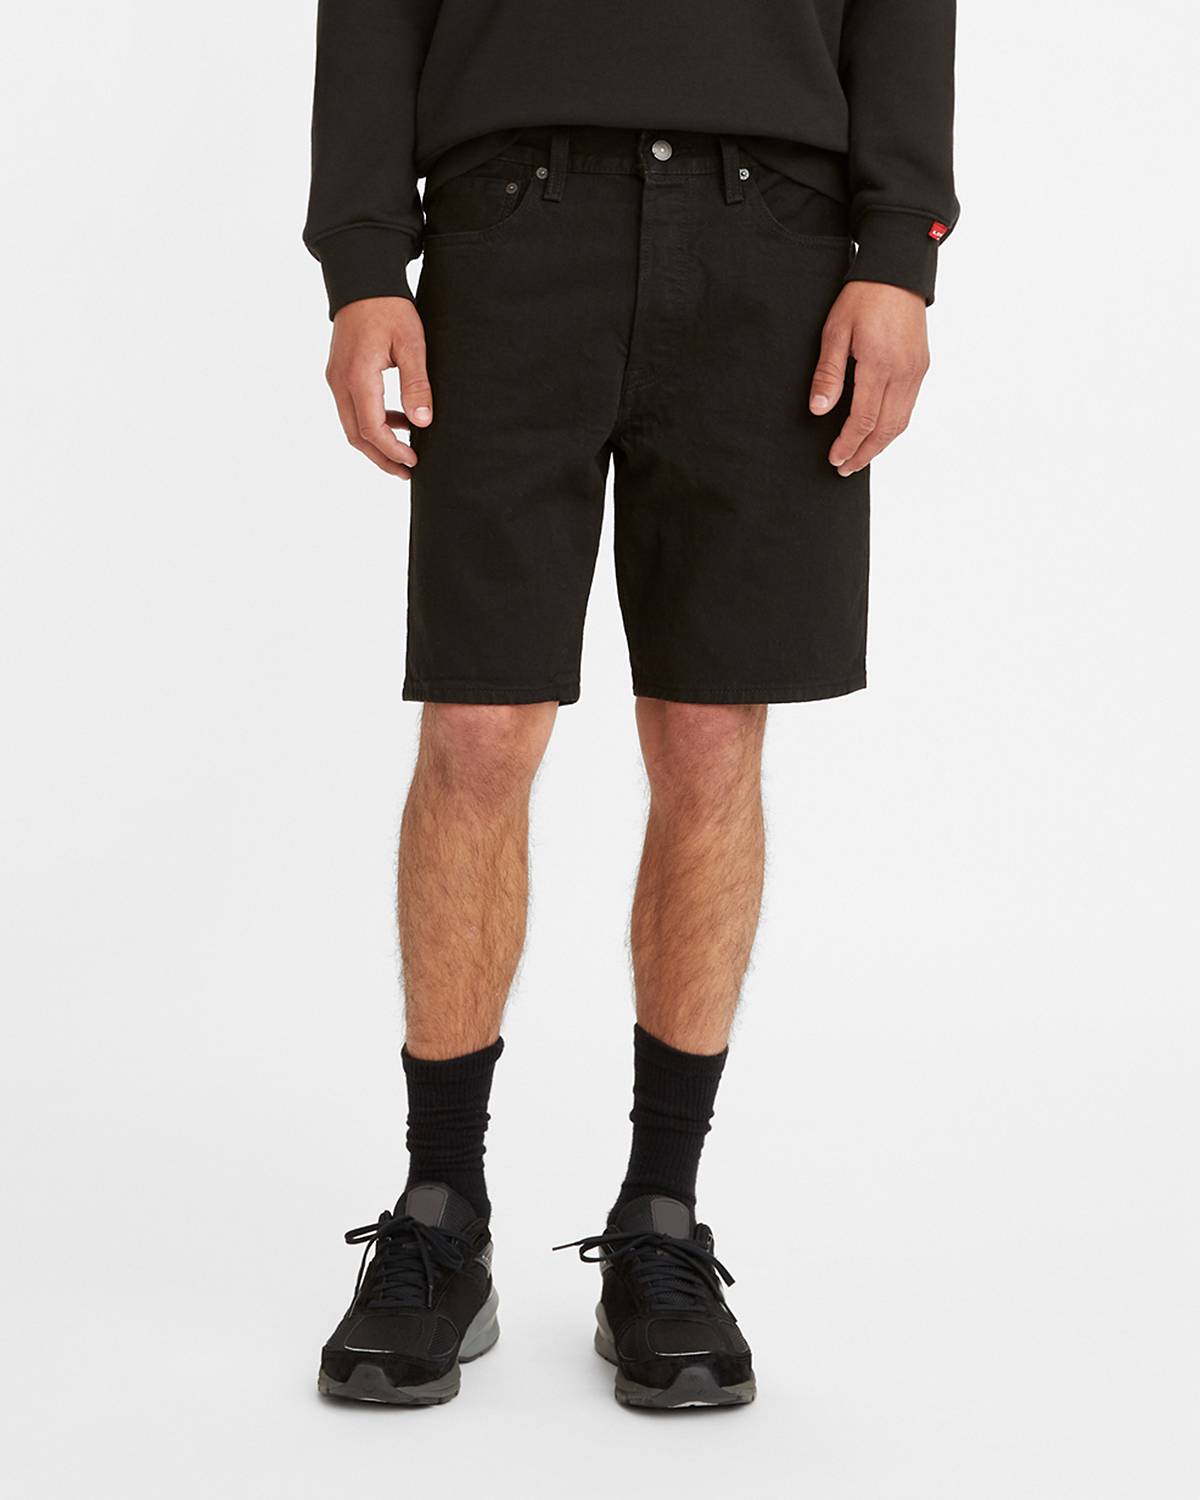 13 Ways to Wear Shorts for Work for Summer 2023